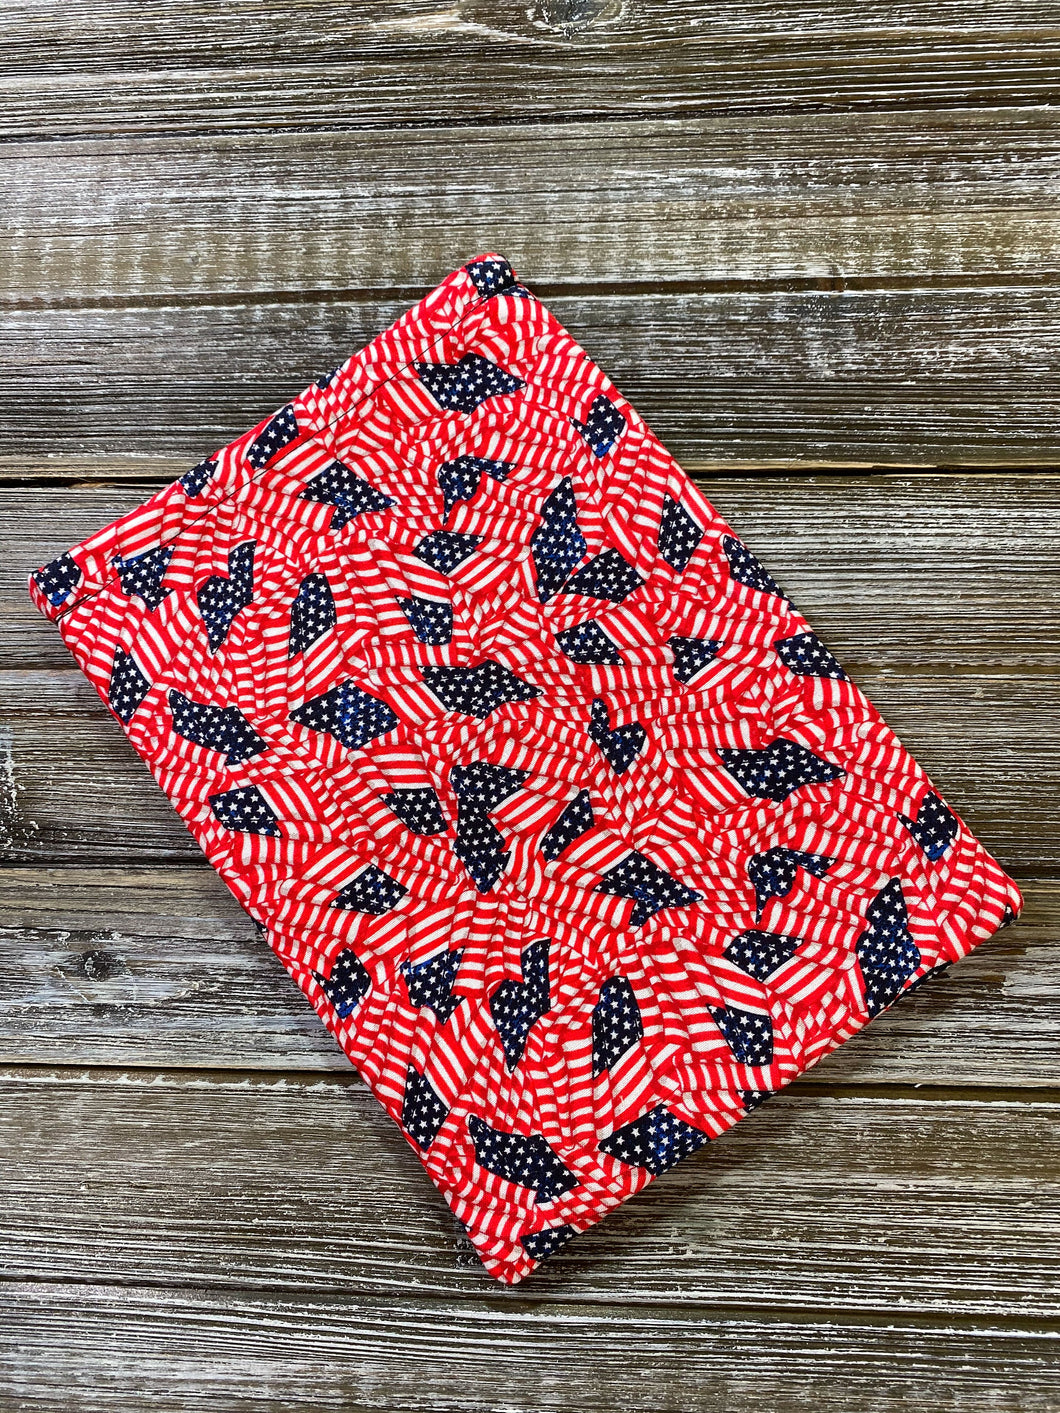 American Flags Padded Book Sleeve | Book Pocket | Protective Book Bag | Book Pouch | Bookish Nerd Gift | Patriotic Kindle Accessory